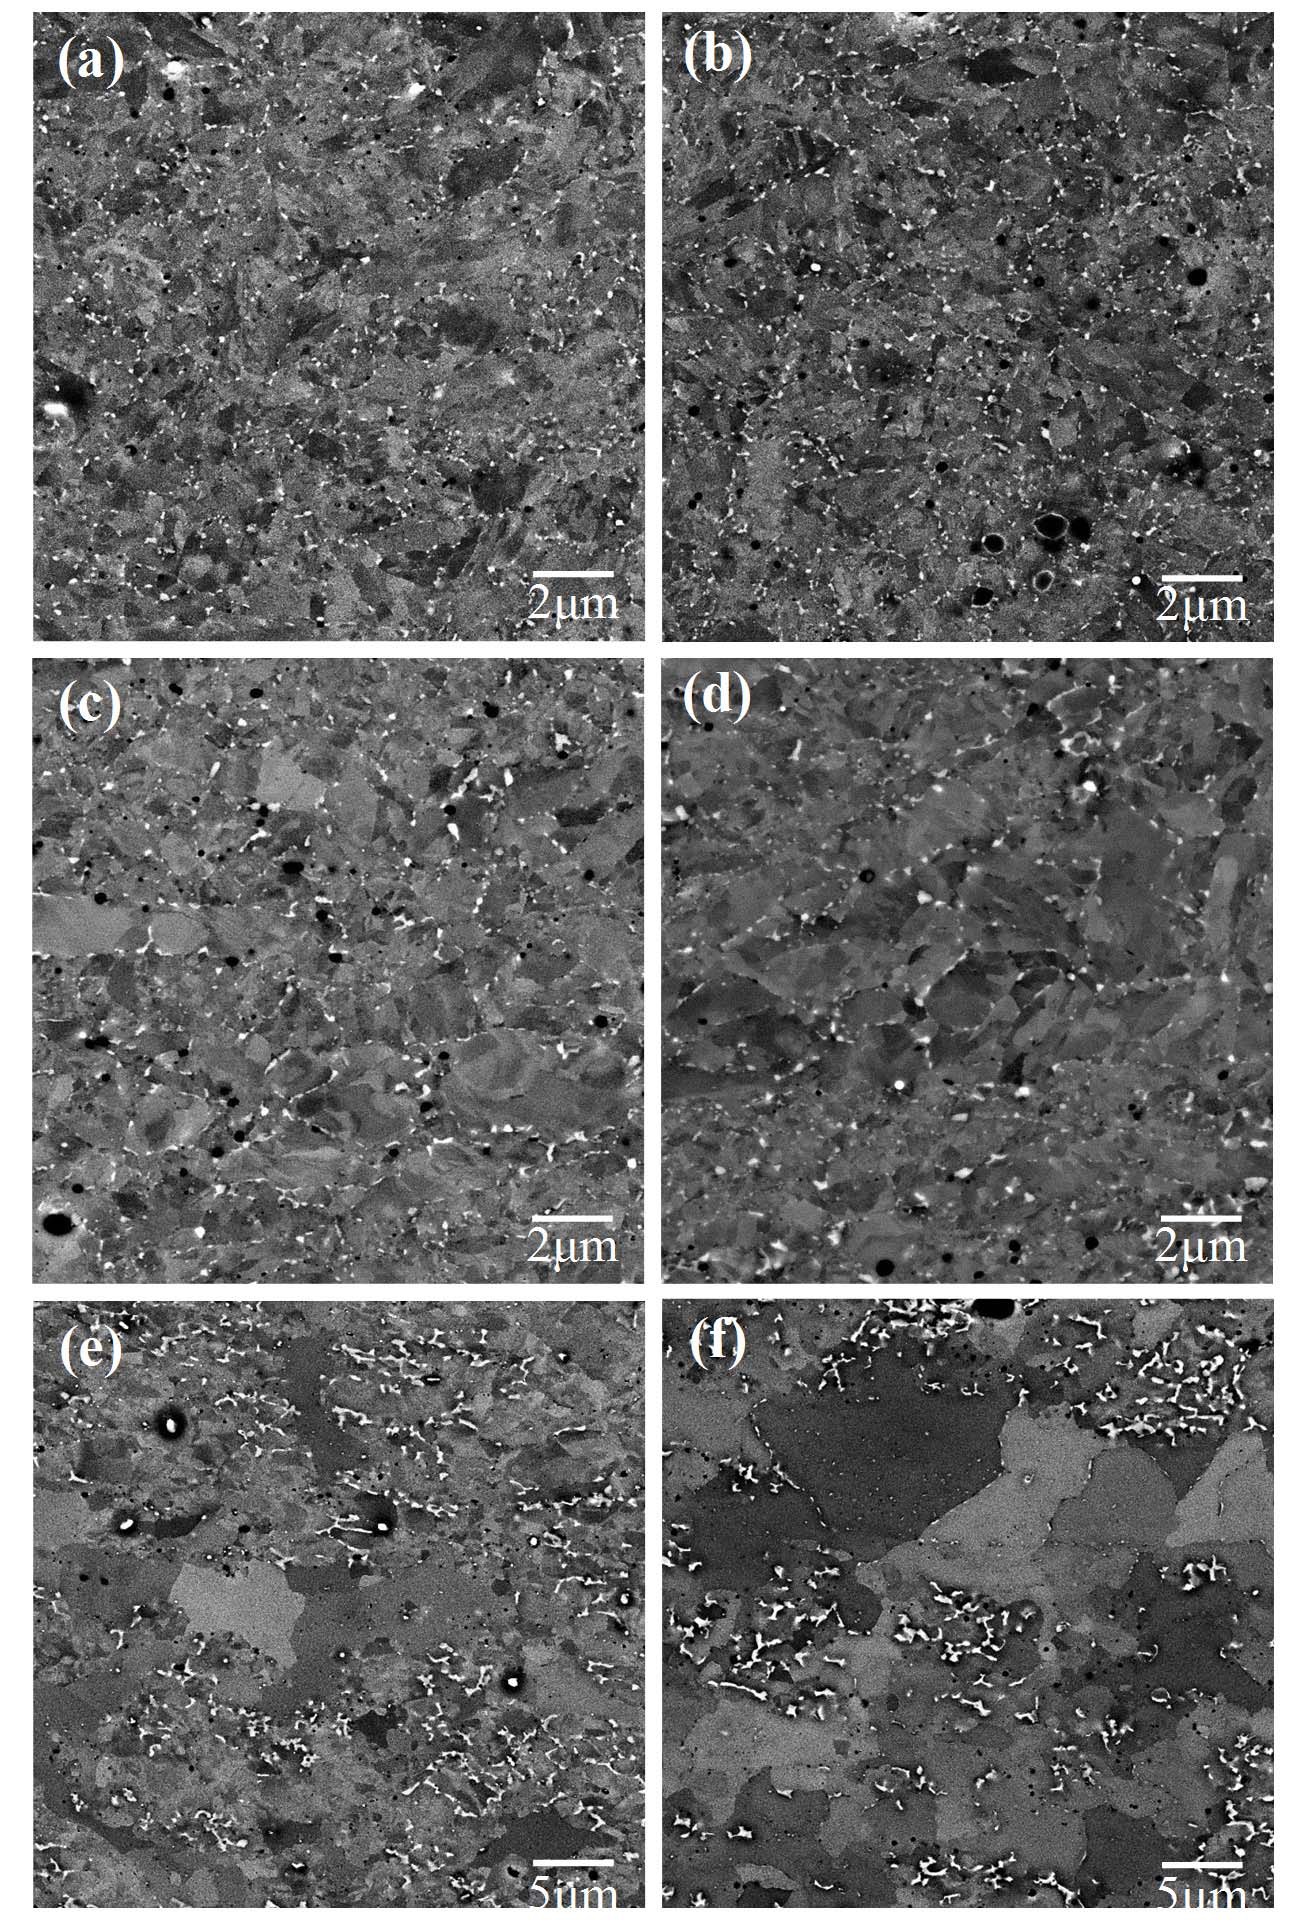 SEM Micrographs on Grain Morphology of Dual Phase
ODS Steels in Different Heat Treatment Processes; (a, b) NT,
(c, d) HR-T, and (e, f) FC Heat Treatment for 10Cr and 12Cr
ODS Steels, Respectively.